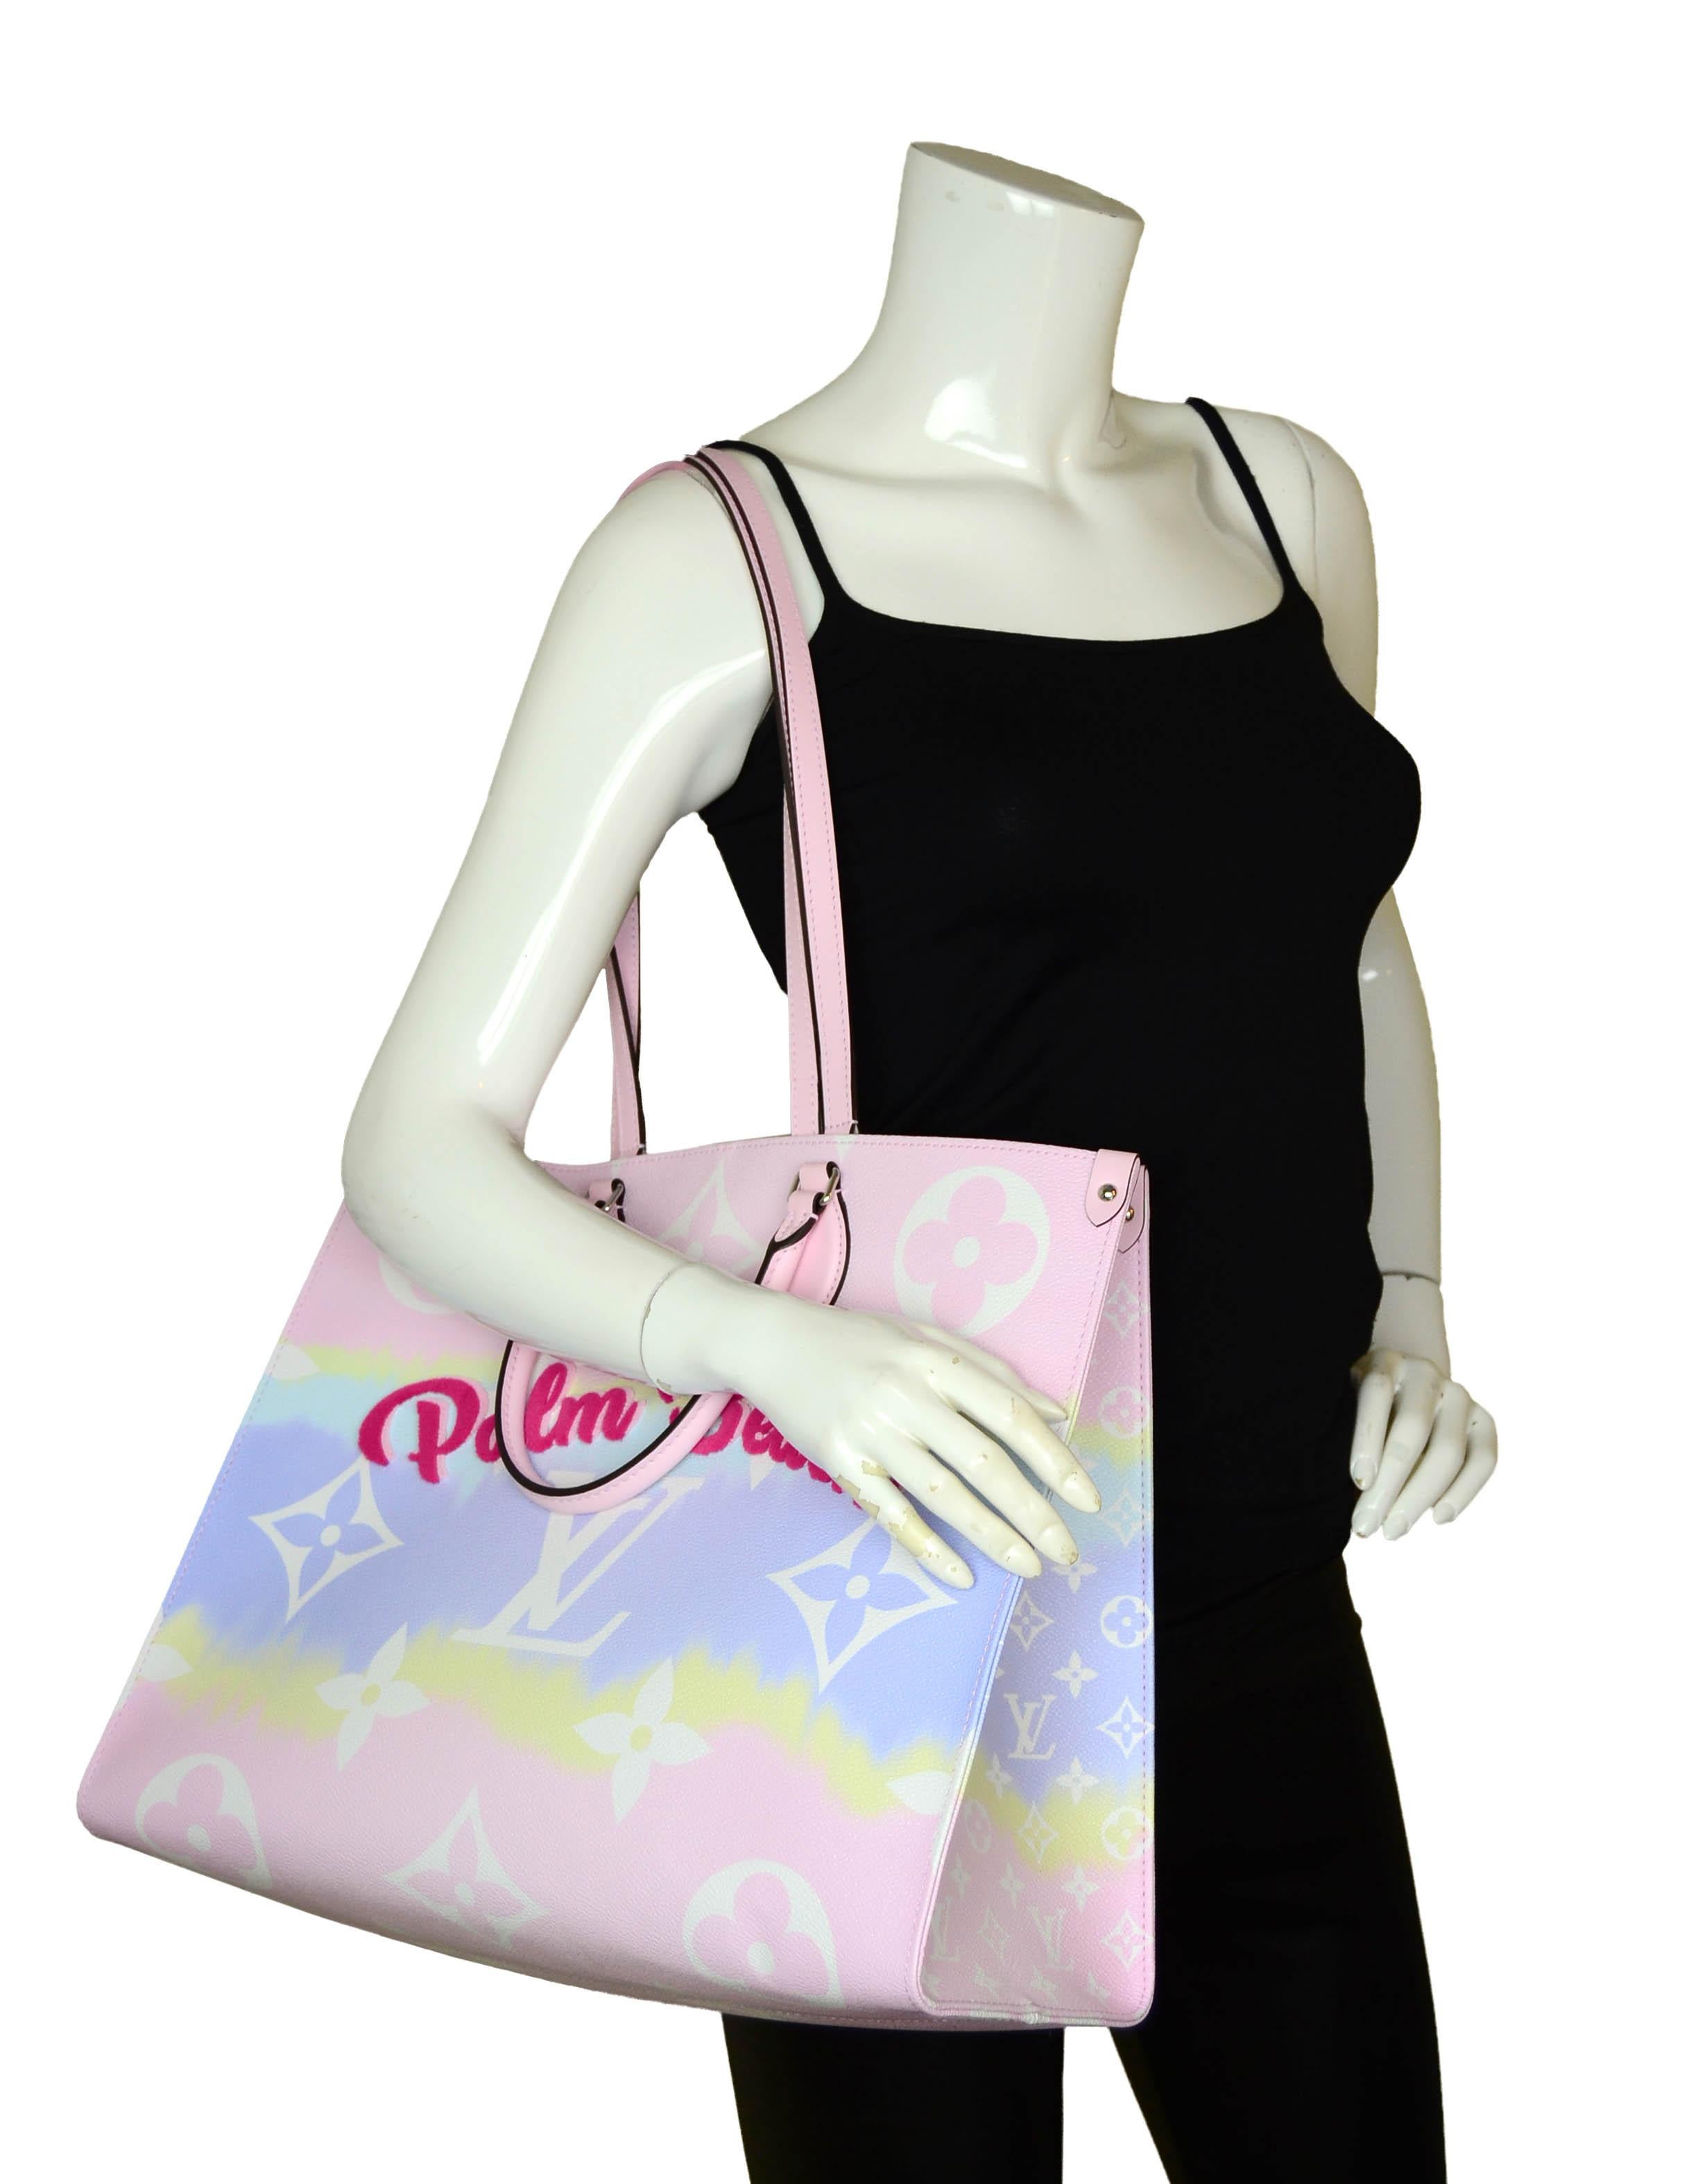 Louis Vuitton Limited Edition Pink Pastel Palm Beach Monogram Escale Onthego GM Tote Bag

Made In: France
Year of Production: 2020
Hardware: Silvertone
Materials: Coated canvas, leather
Lining: Monogram fabric
Closure/Opening: Open top with center